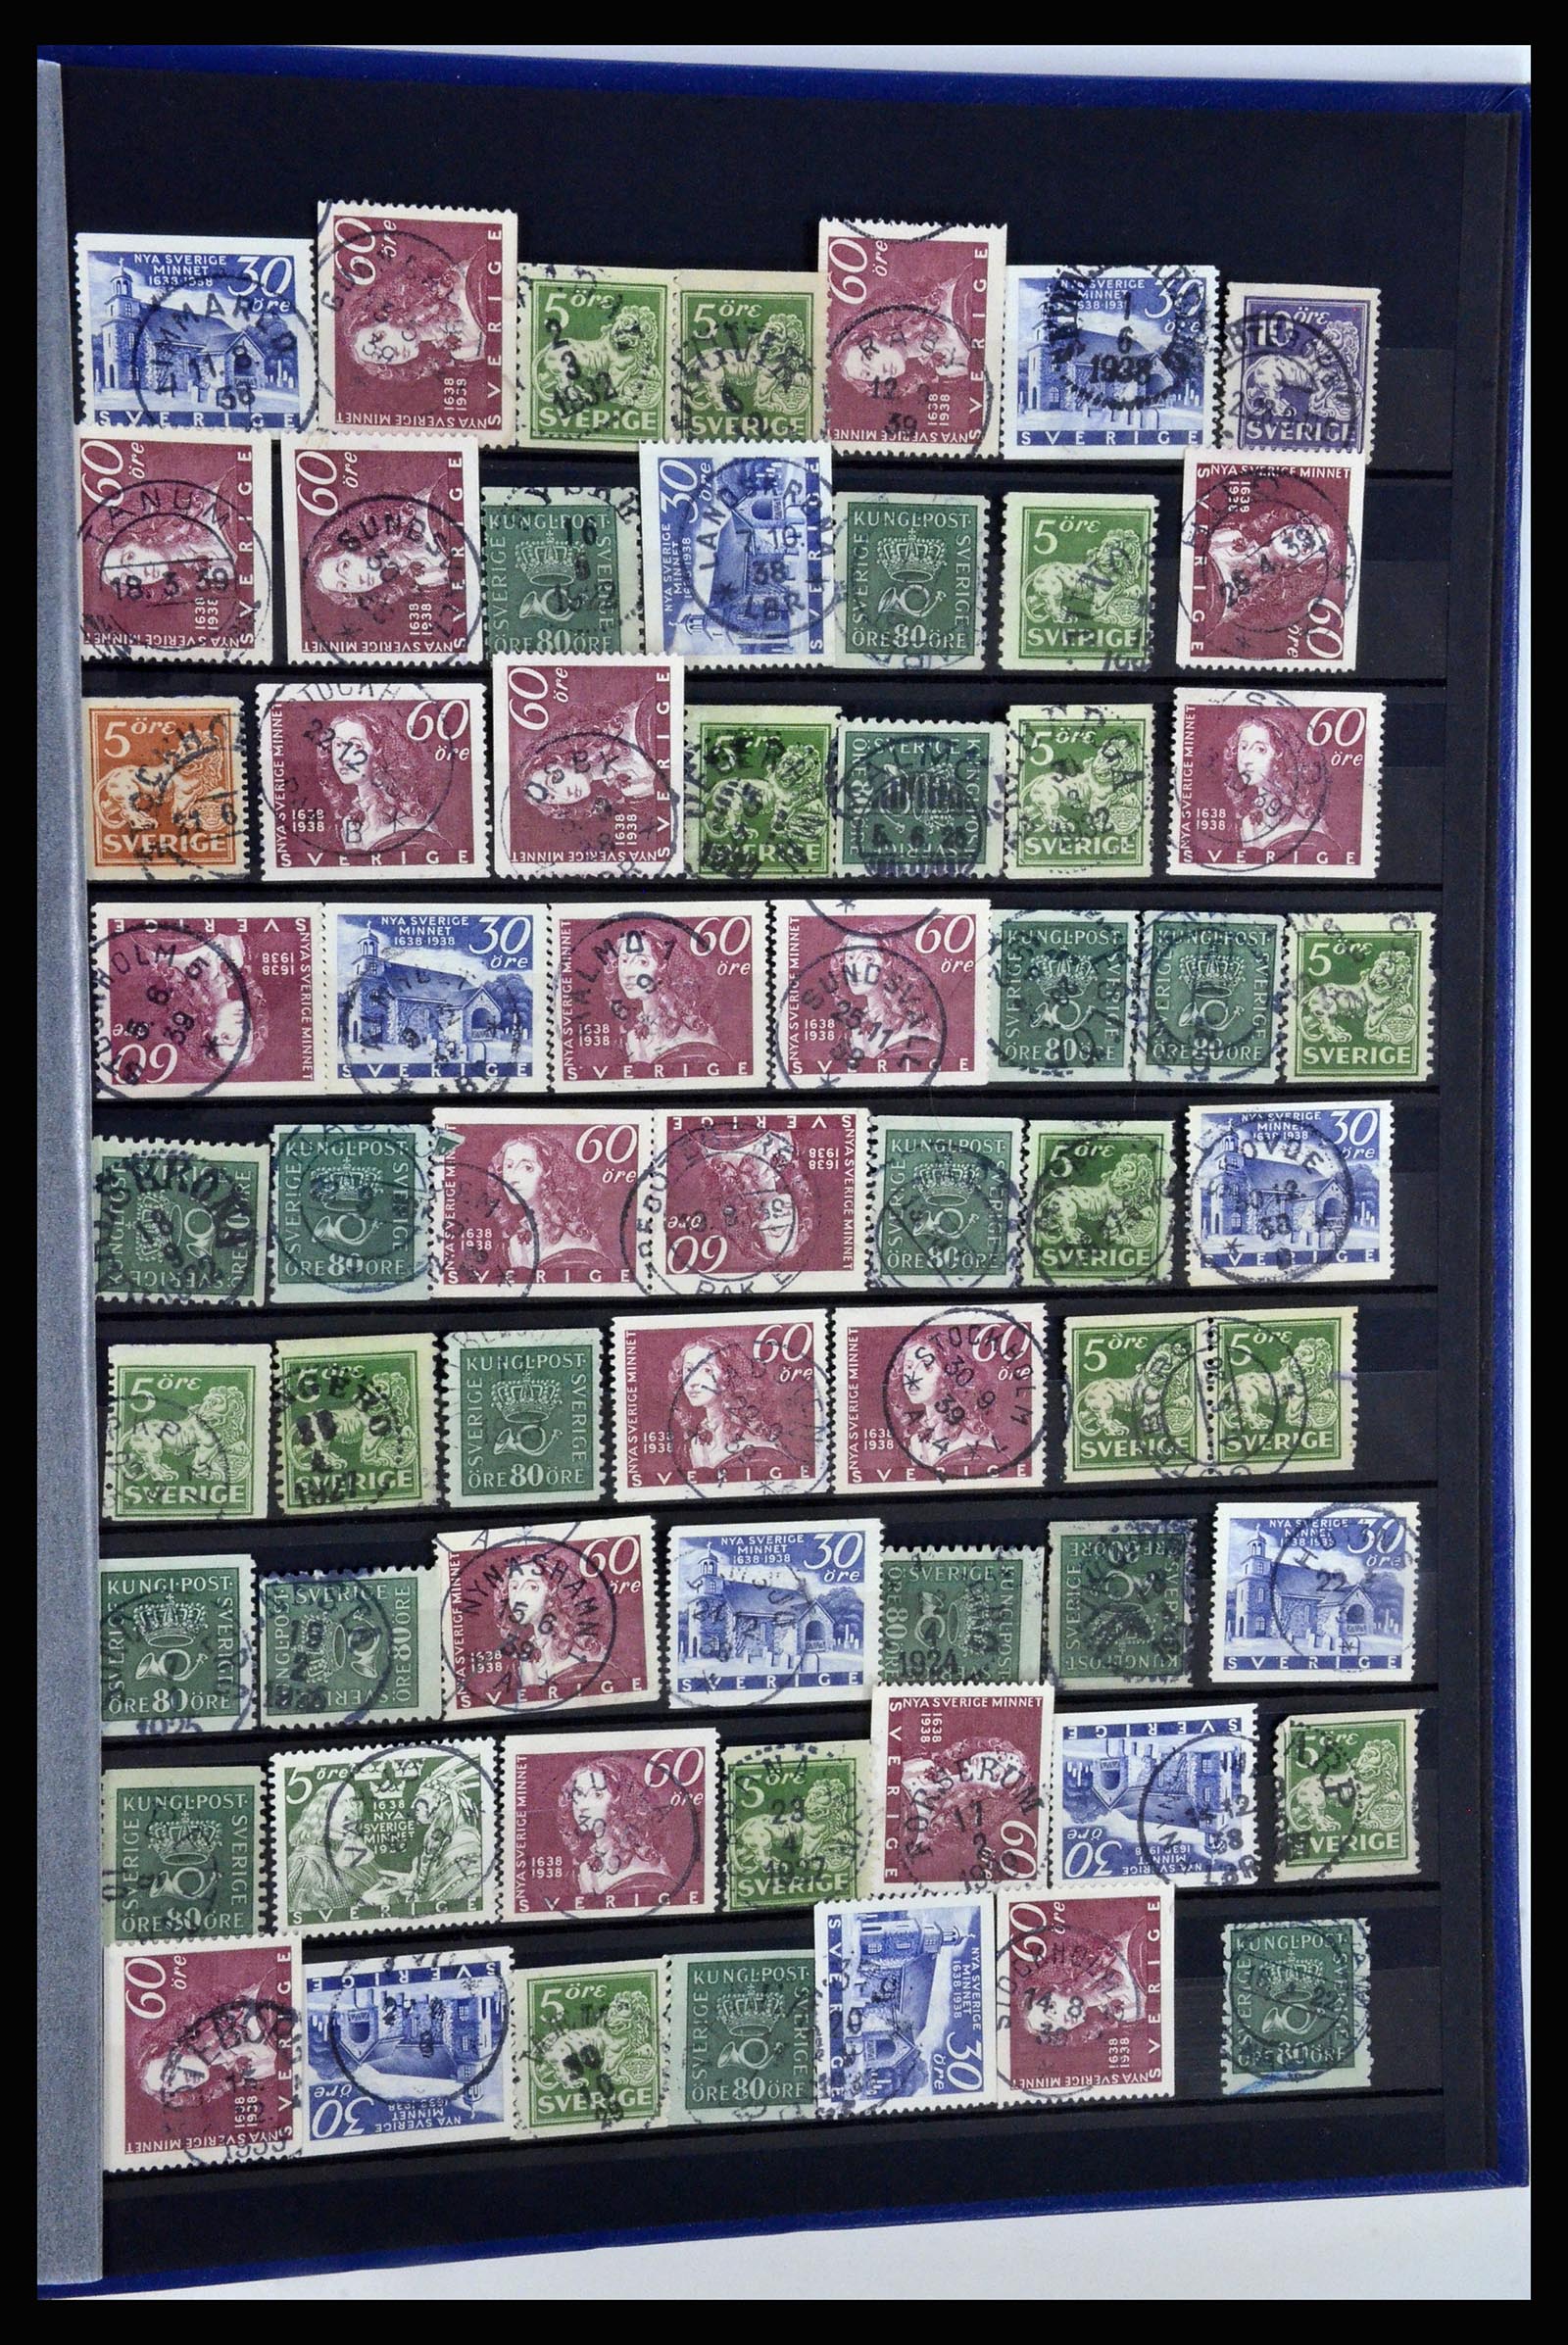 36316 059 - Stamp collection 36316 Sweden cancellations 1920-1938.